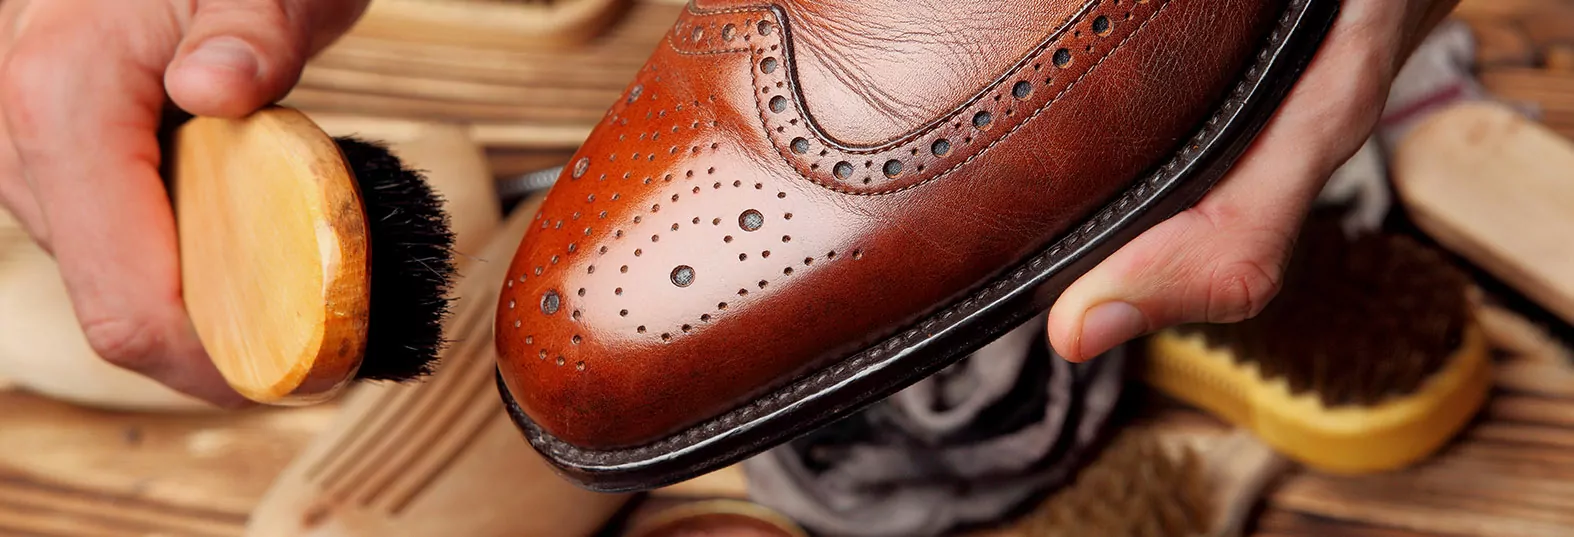 Cleaning your shoes correctly – find what is important for shoe care here